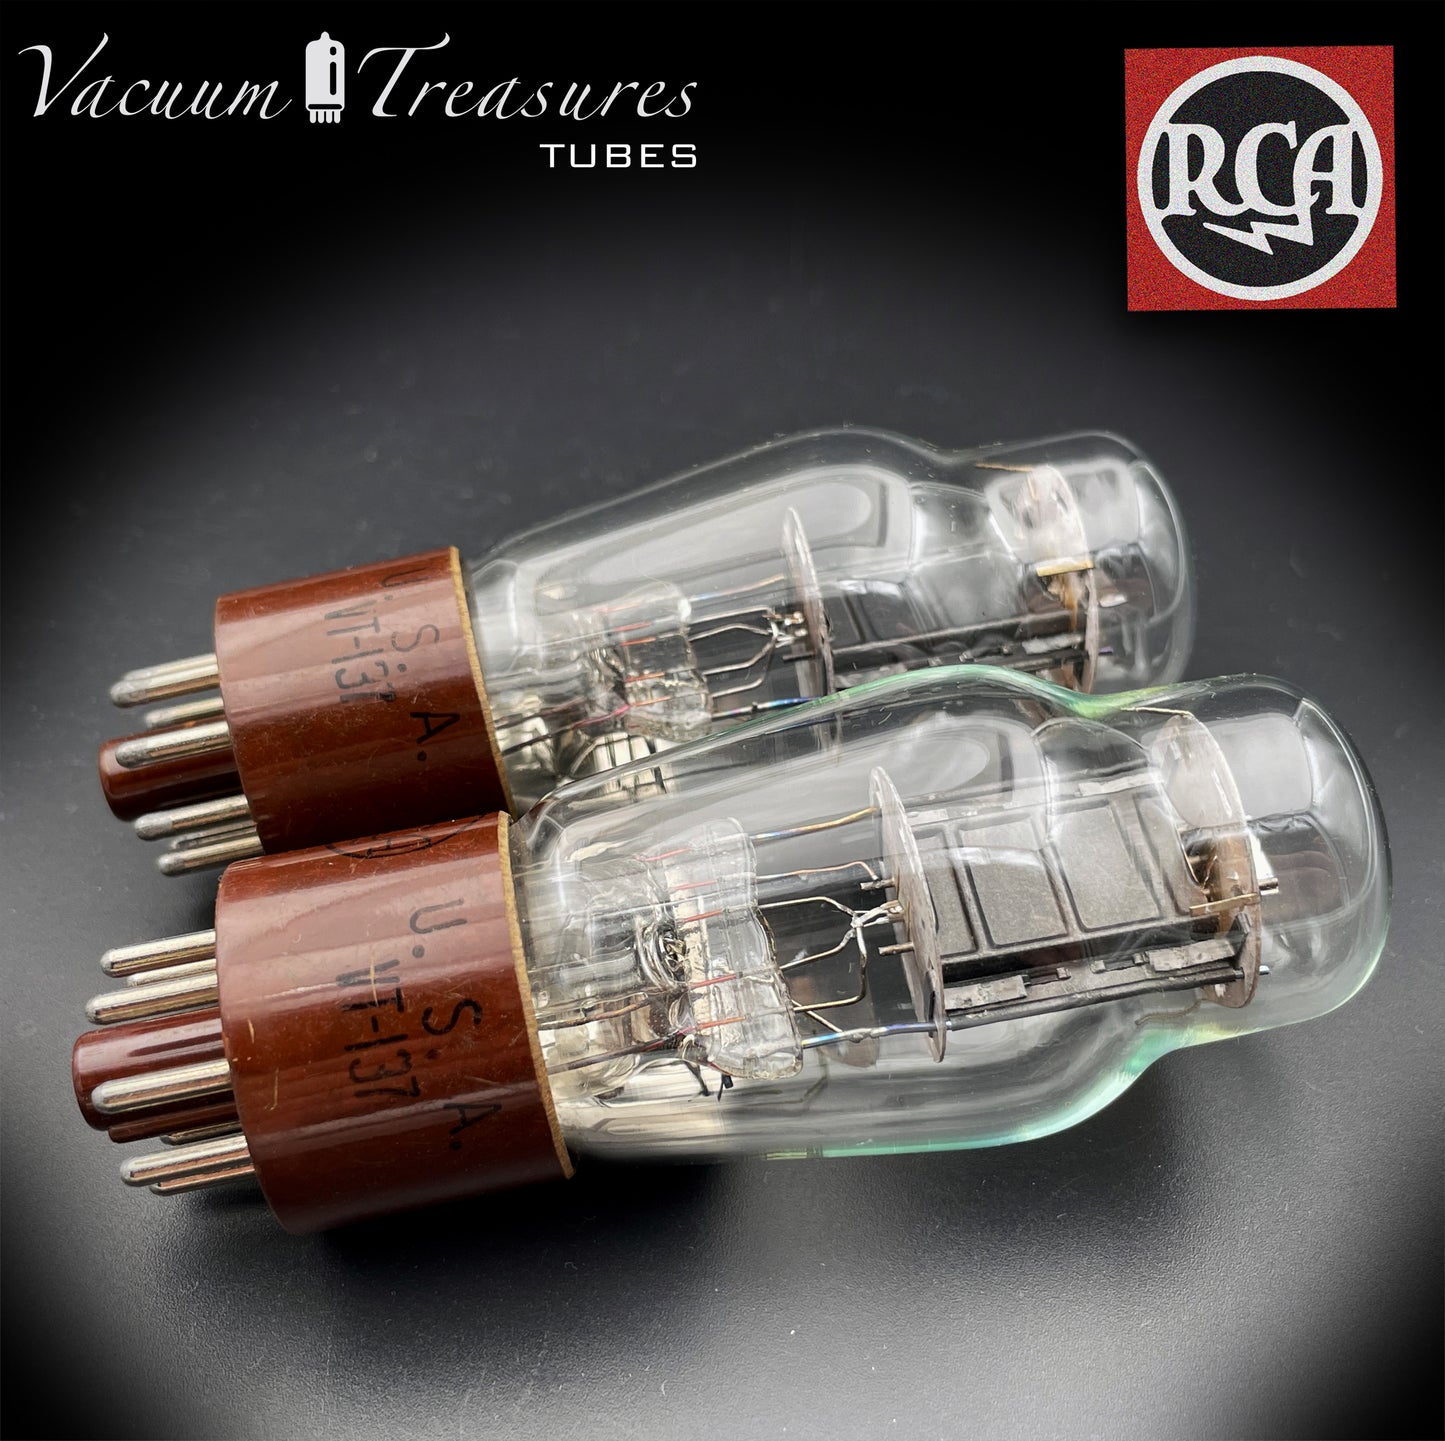 1626 (VT-137) RCA NOS Power Triode für Darling-Amp Matched Pair MADE IN USA